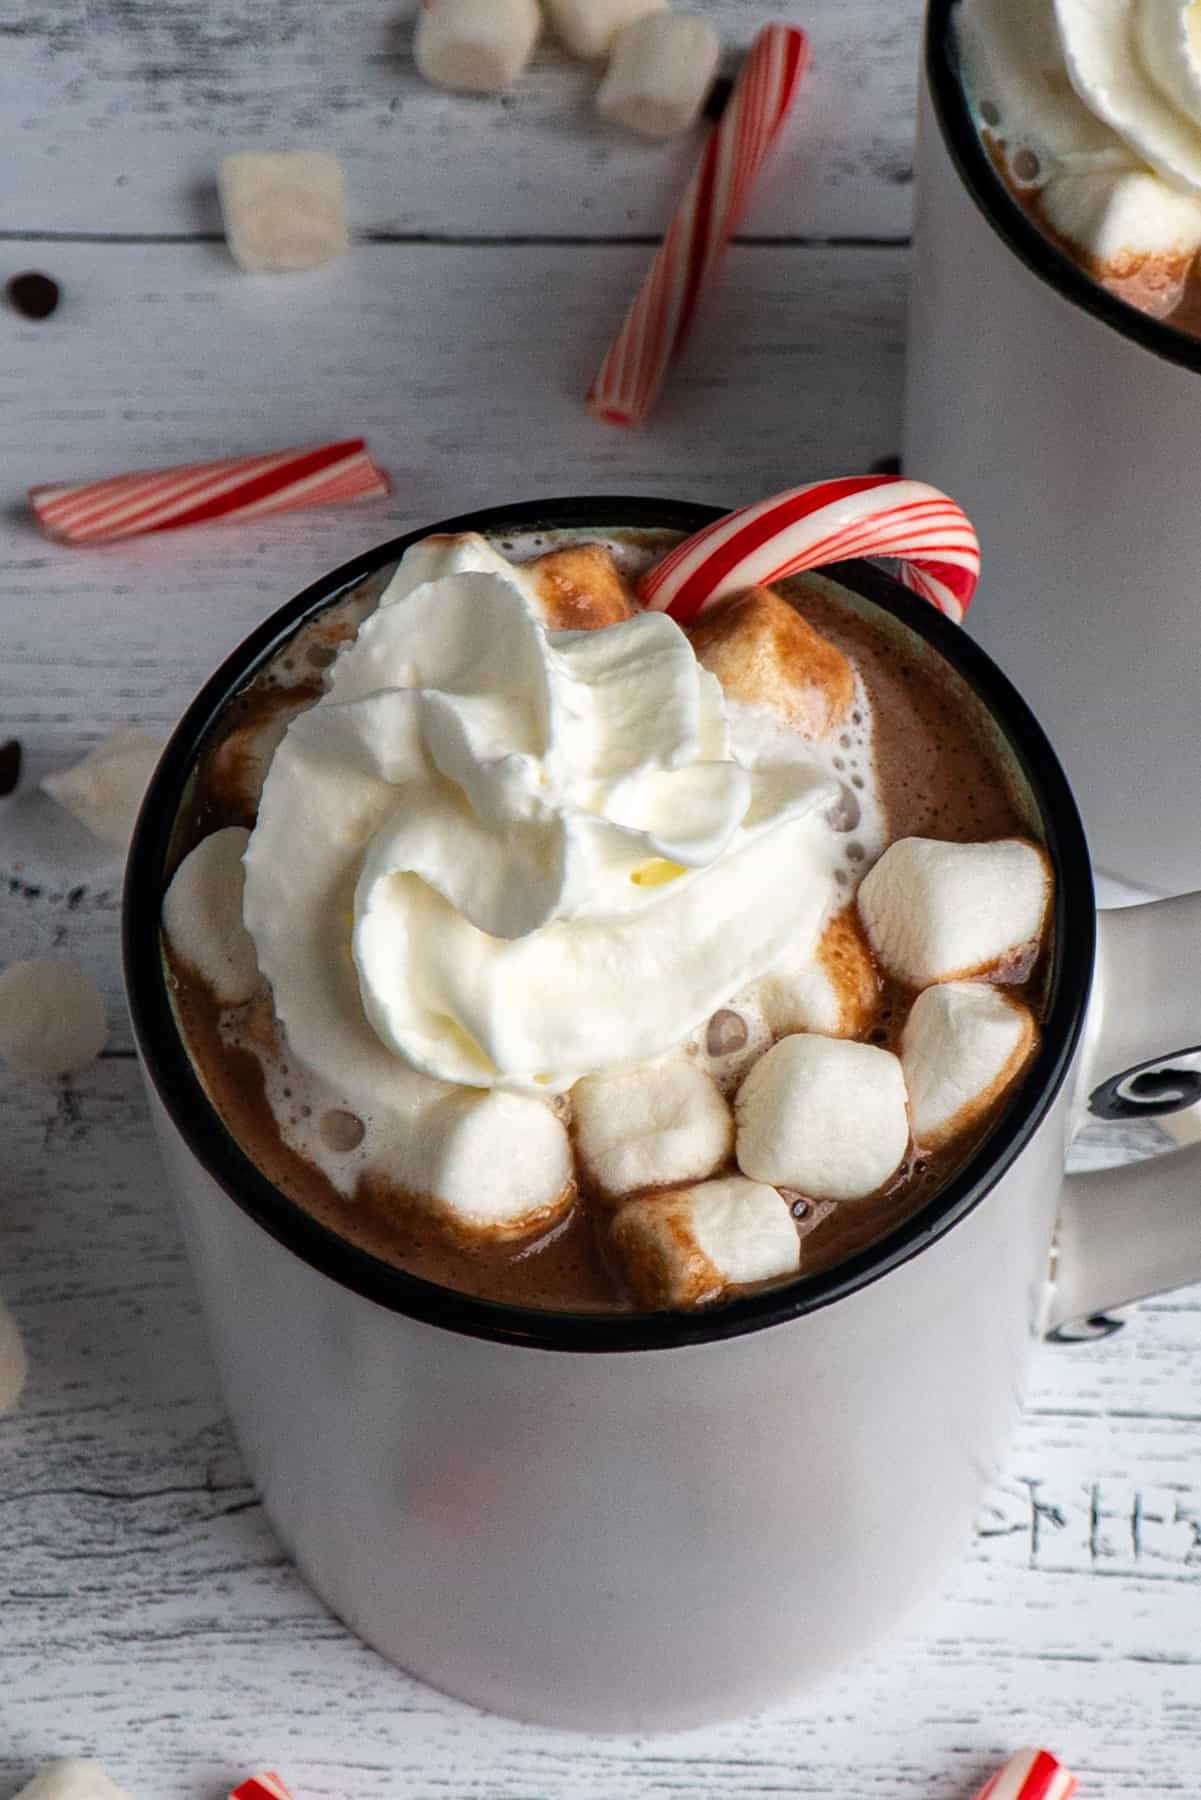 Slow cooker hot chocolate in a white mug with marshmallows, candy cane and whip cream on top